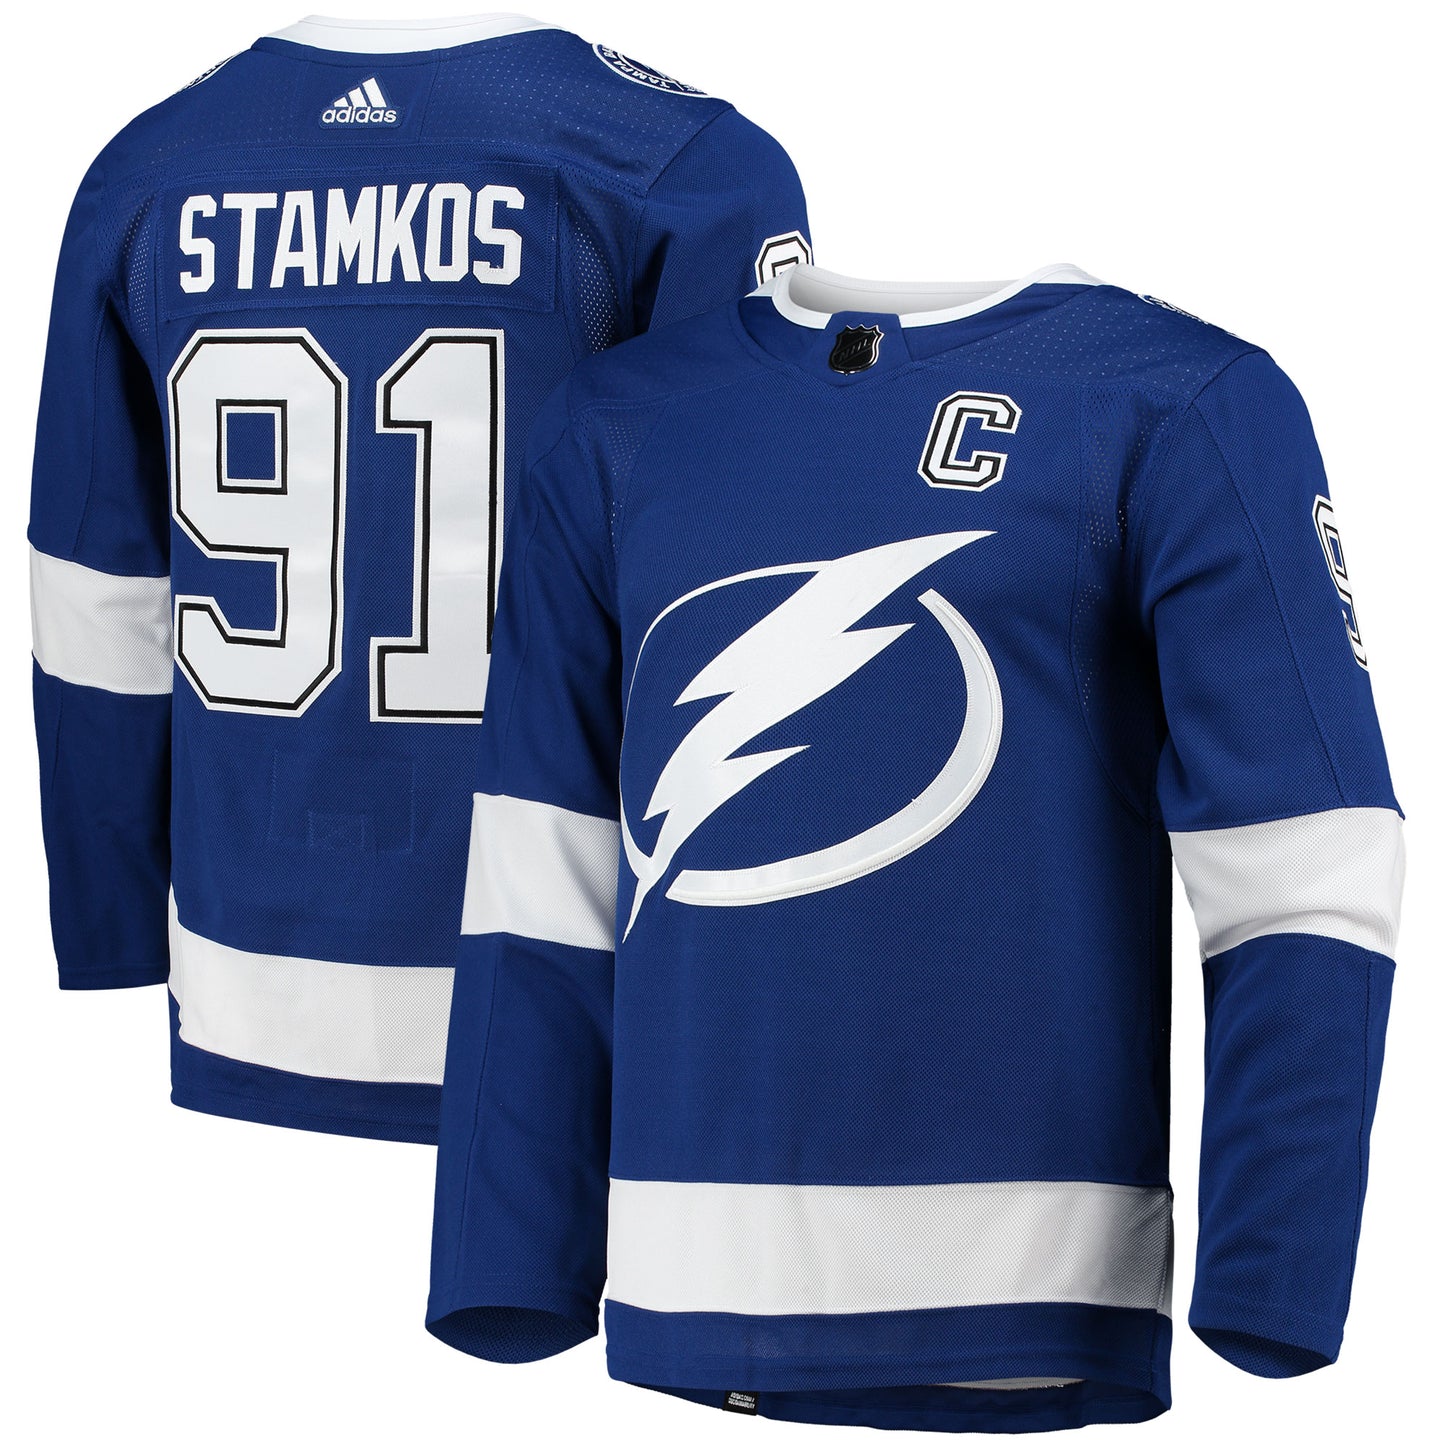 Steven Stamkos Tampa Bay Lightning adidas Home Captain Patch Primegreen Authentic Pro Player Jersey - Blue